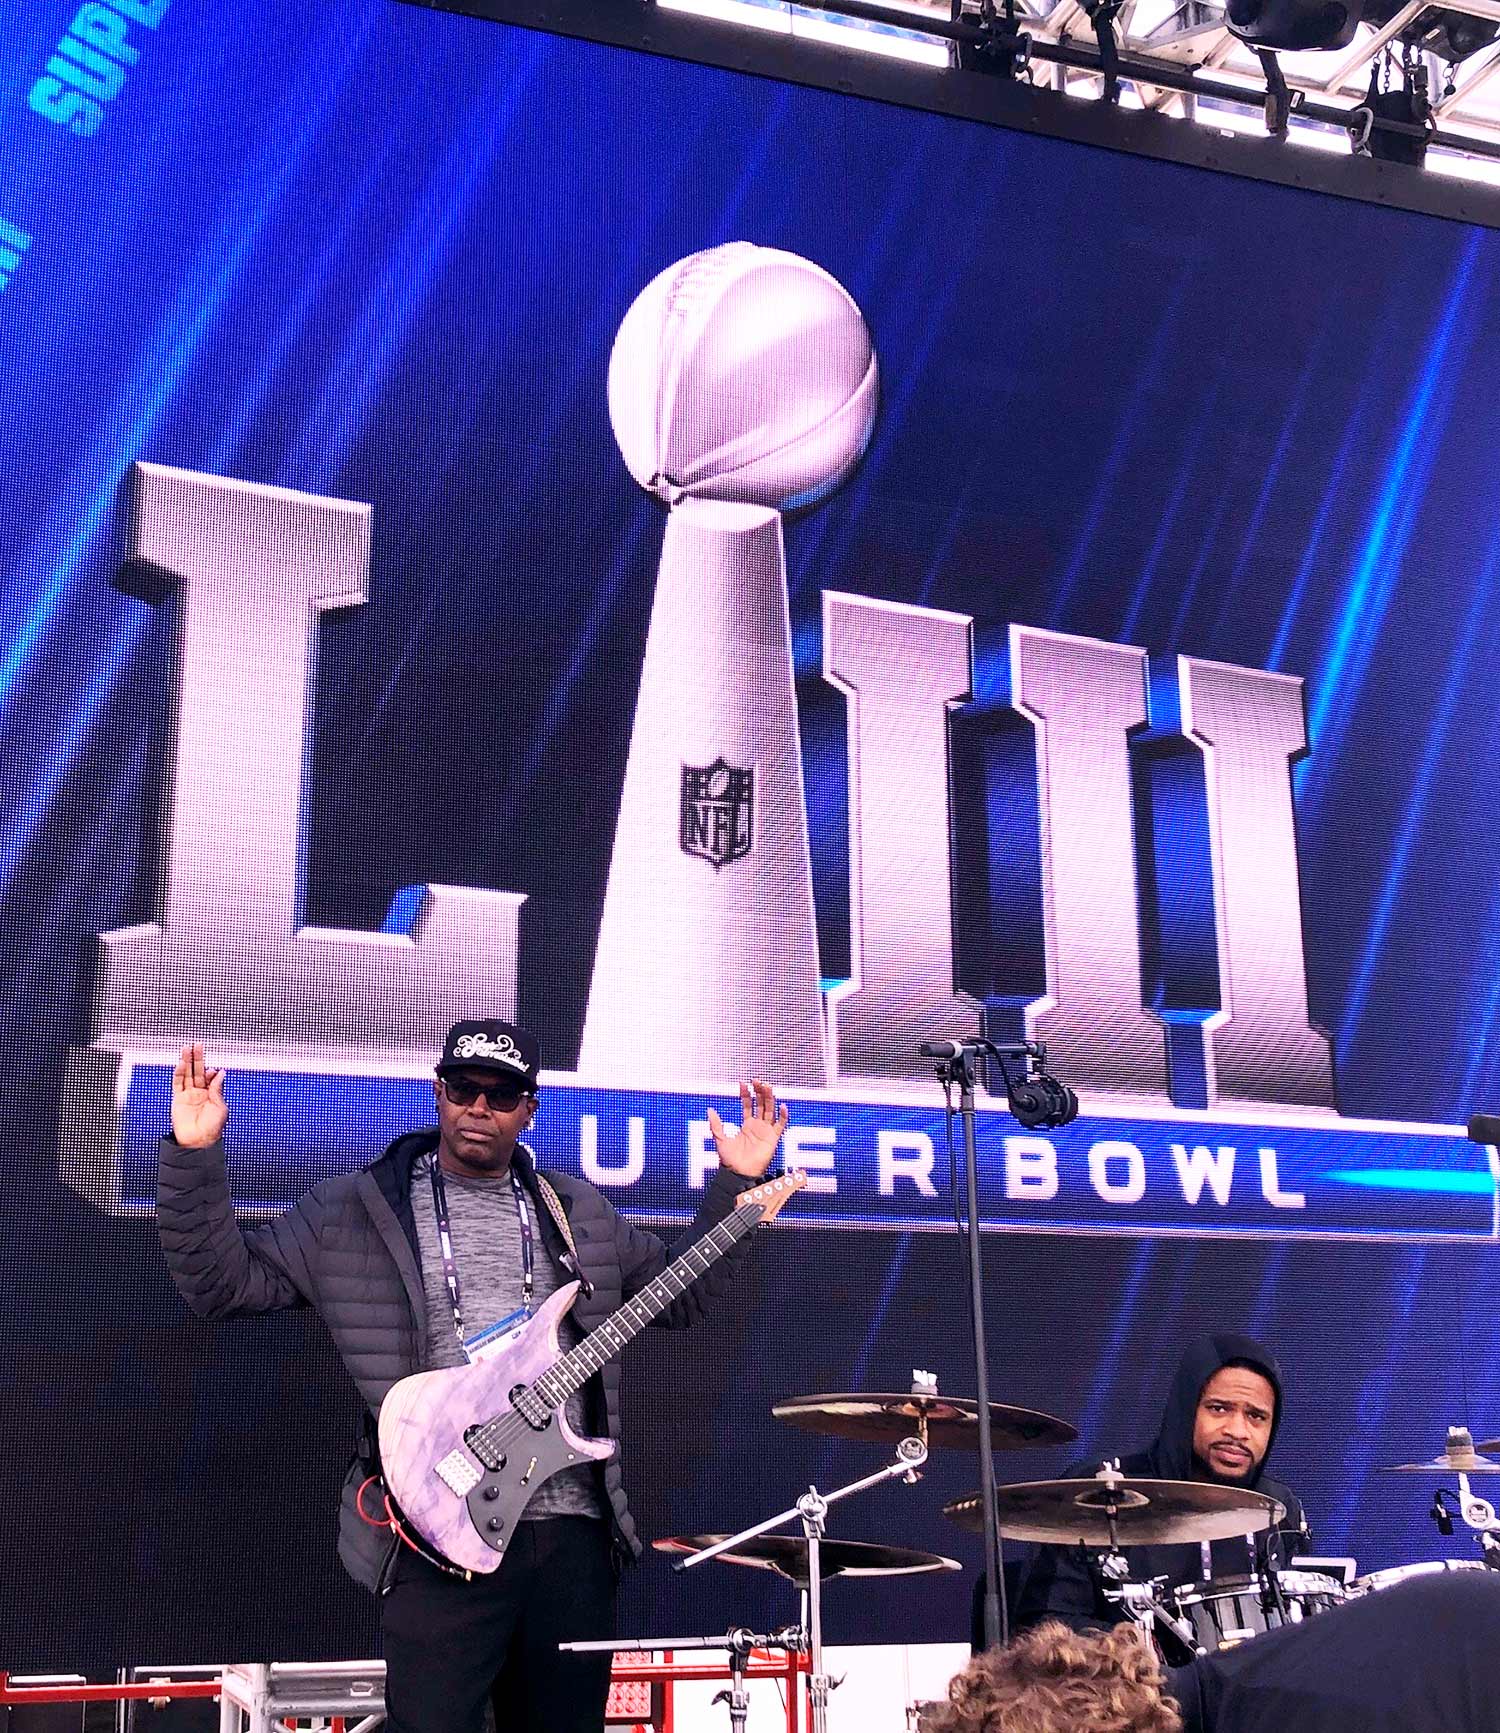 ede wright performs at super bowl 2019